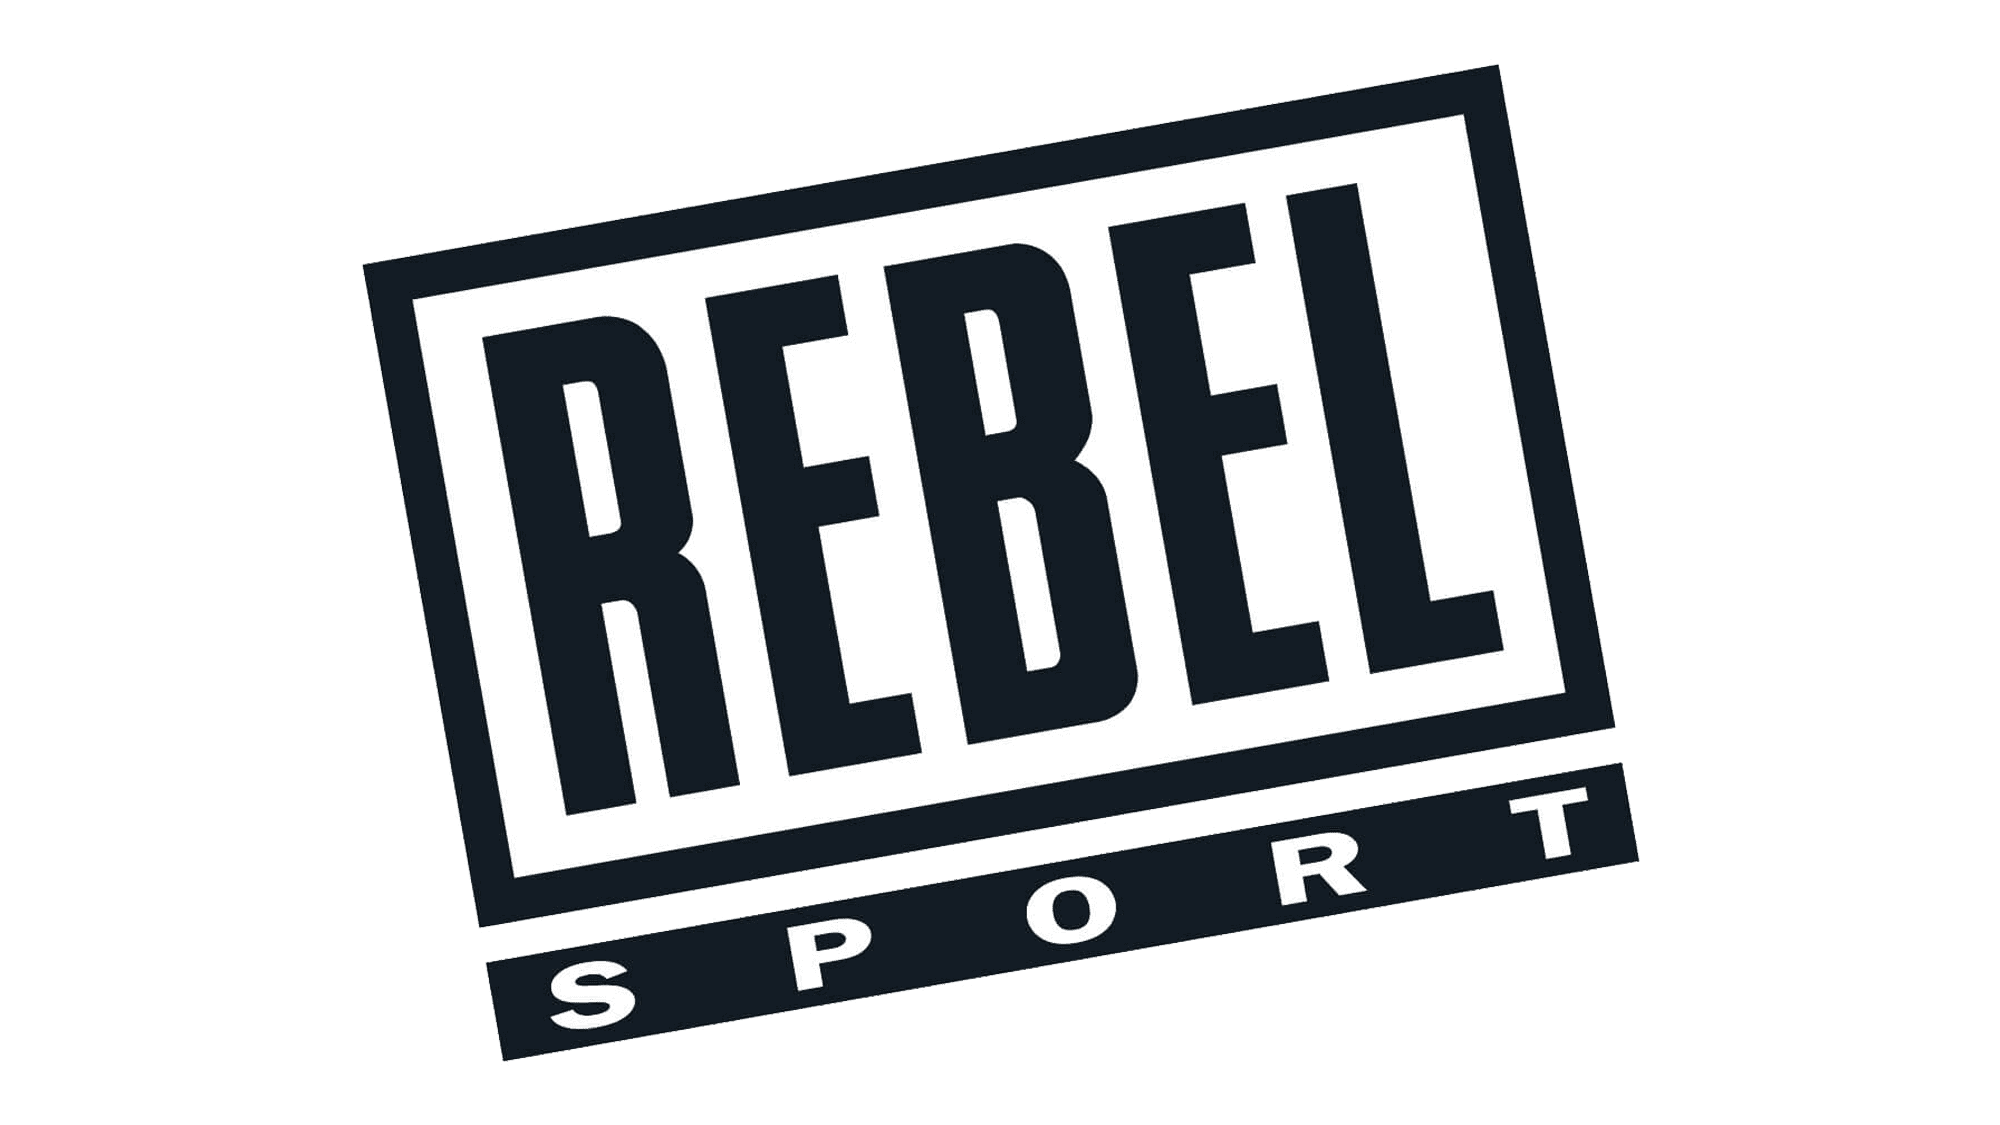 Rebel Logo Stock Photos and Images - 123RF